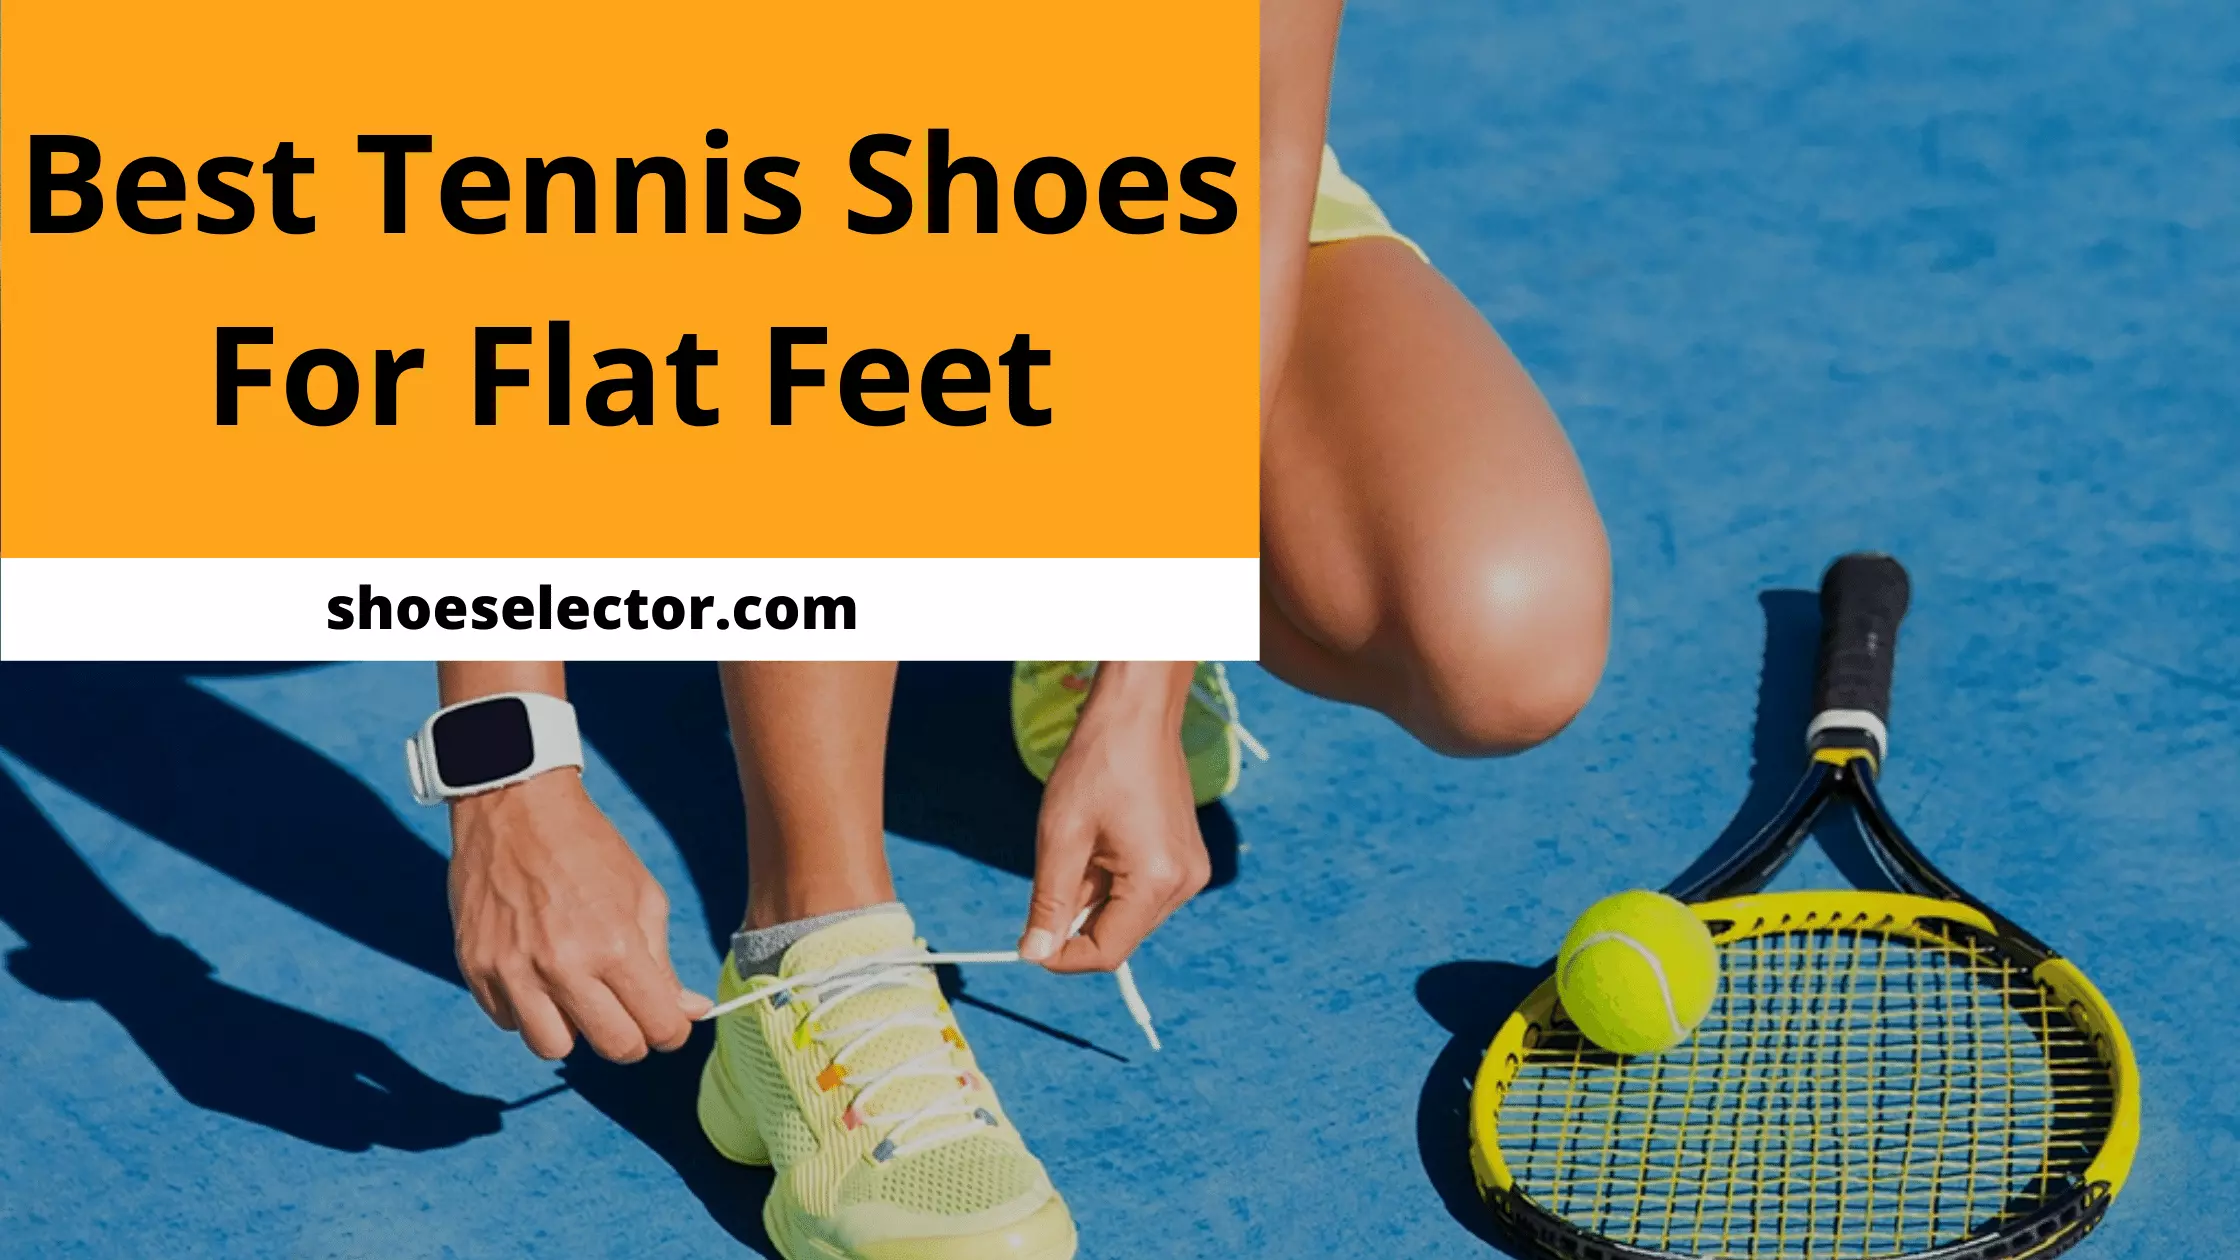 Best Tennis Shoes For Flat Feet - According To Experts